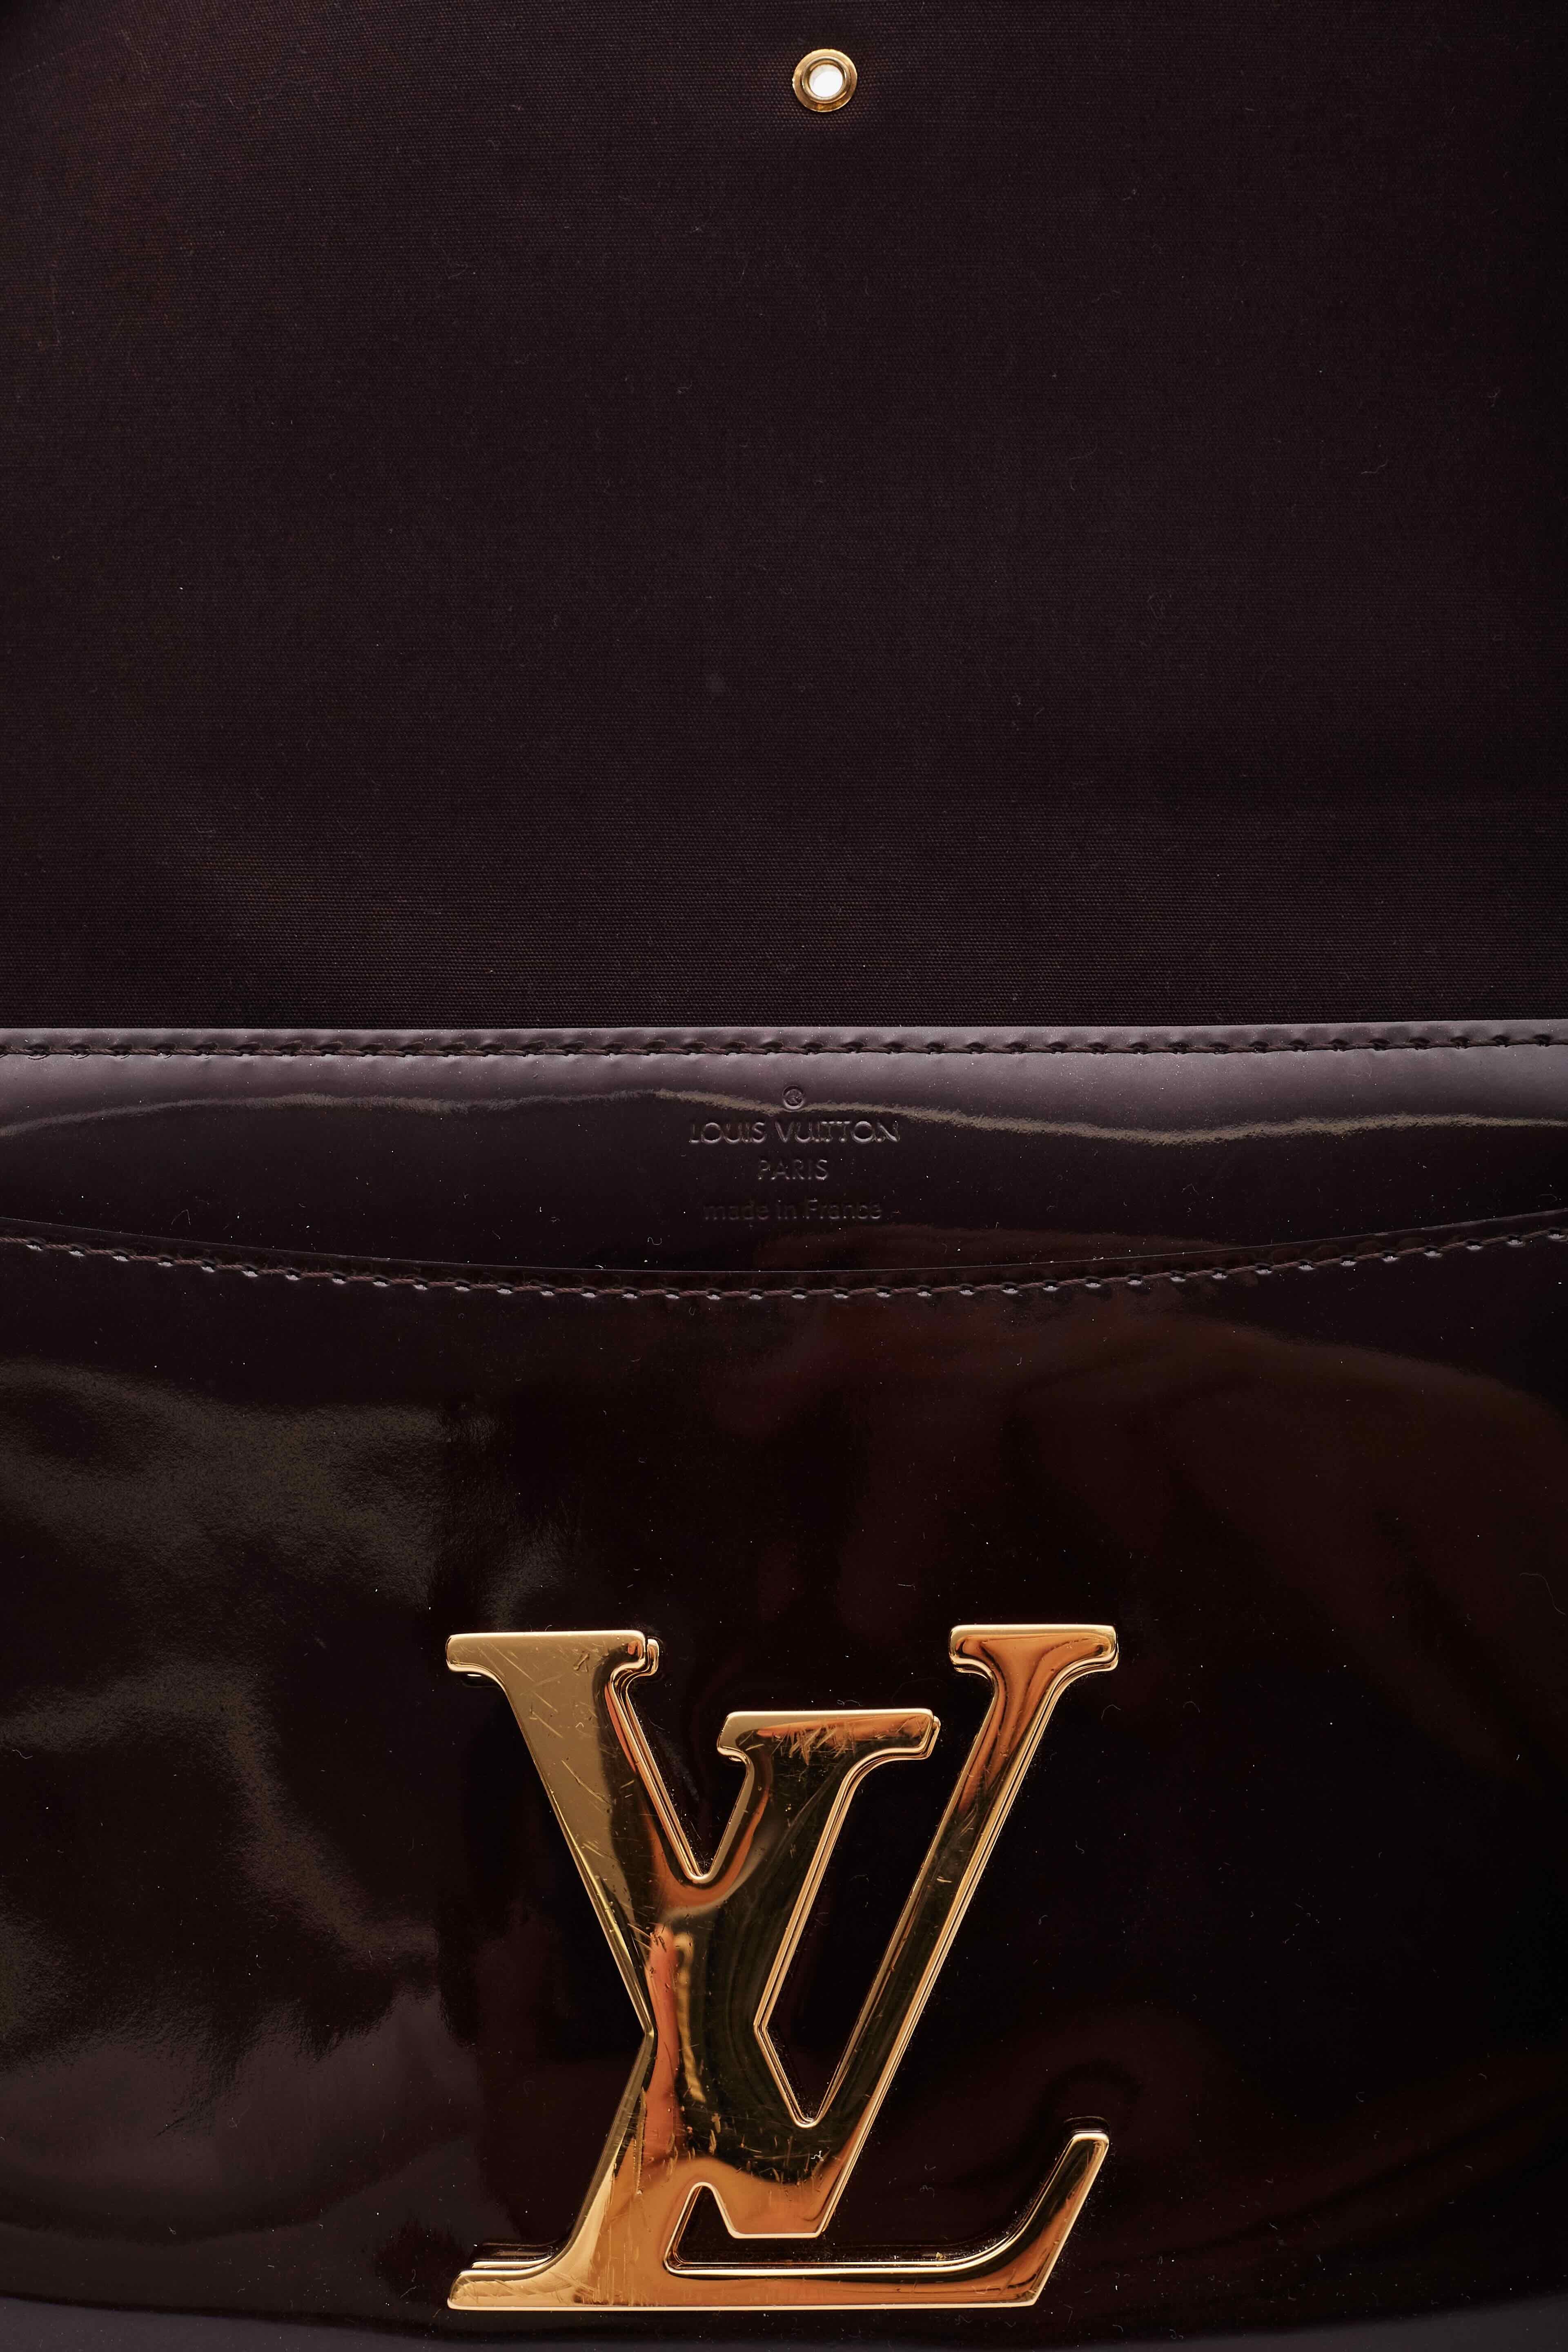 Louis vuitton shoulder bag. From the 2013 collection by marc jacobs. Burgundy vernis patent leather. Brass hardware. Chain-link shoulder strap. Chain-link accents. Canvas lining with card slots. Clasp closure at front.

Color: Black with multicolor